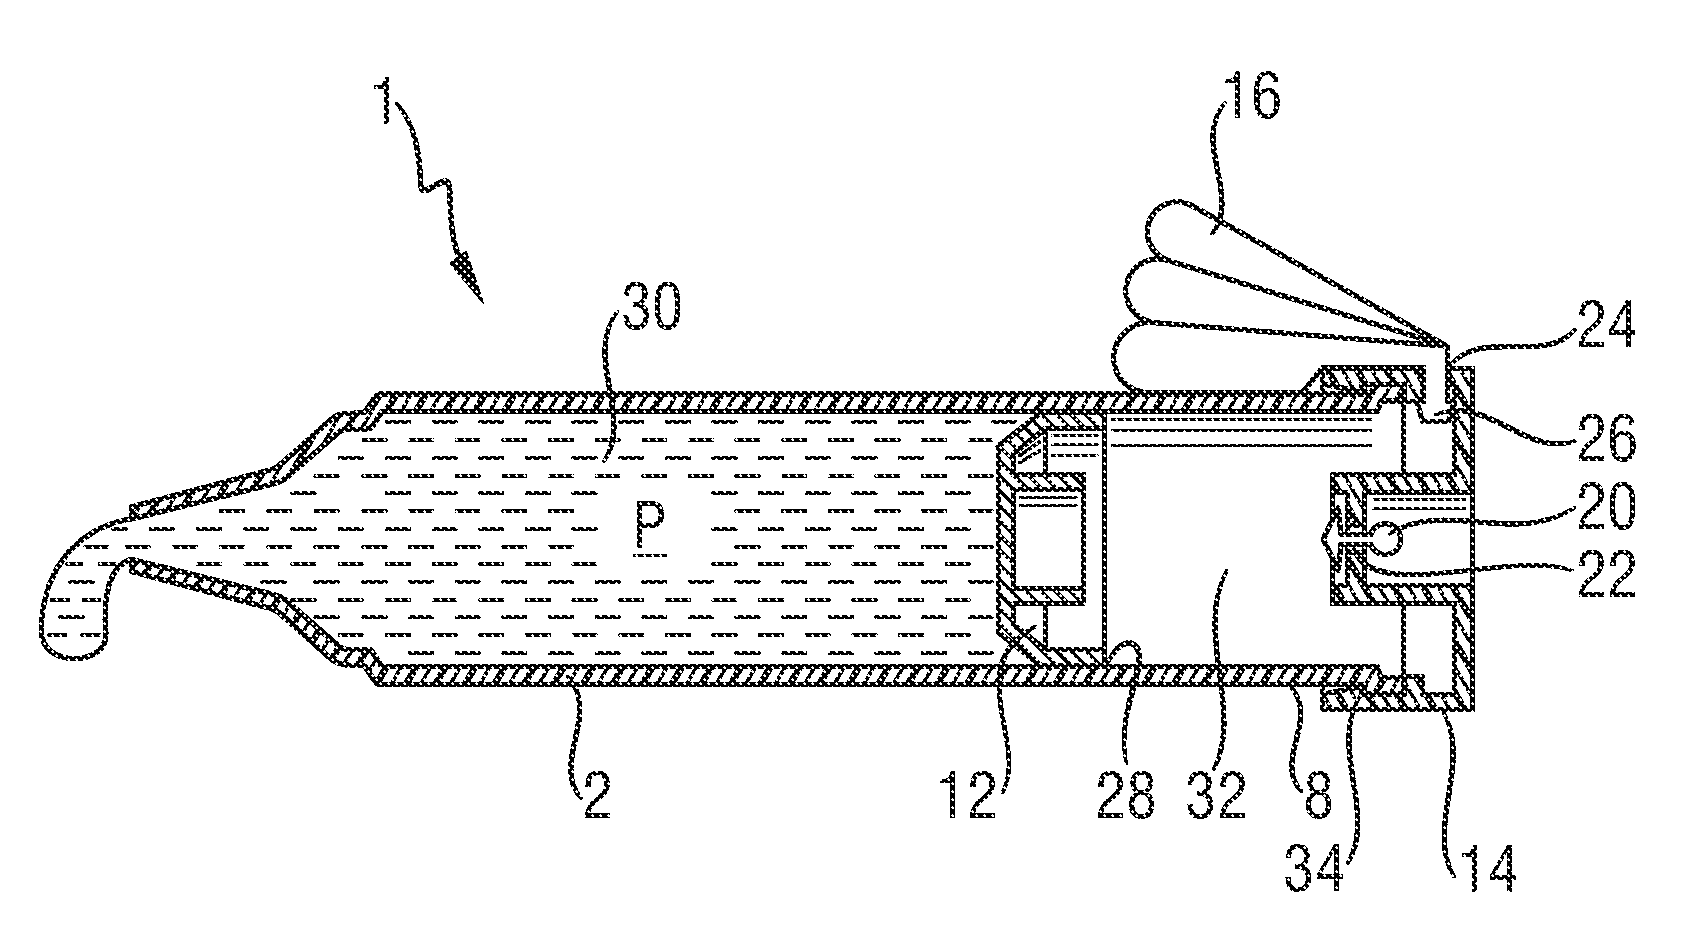 Dispensing device for viscous materials